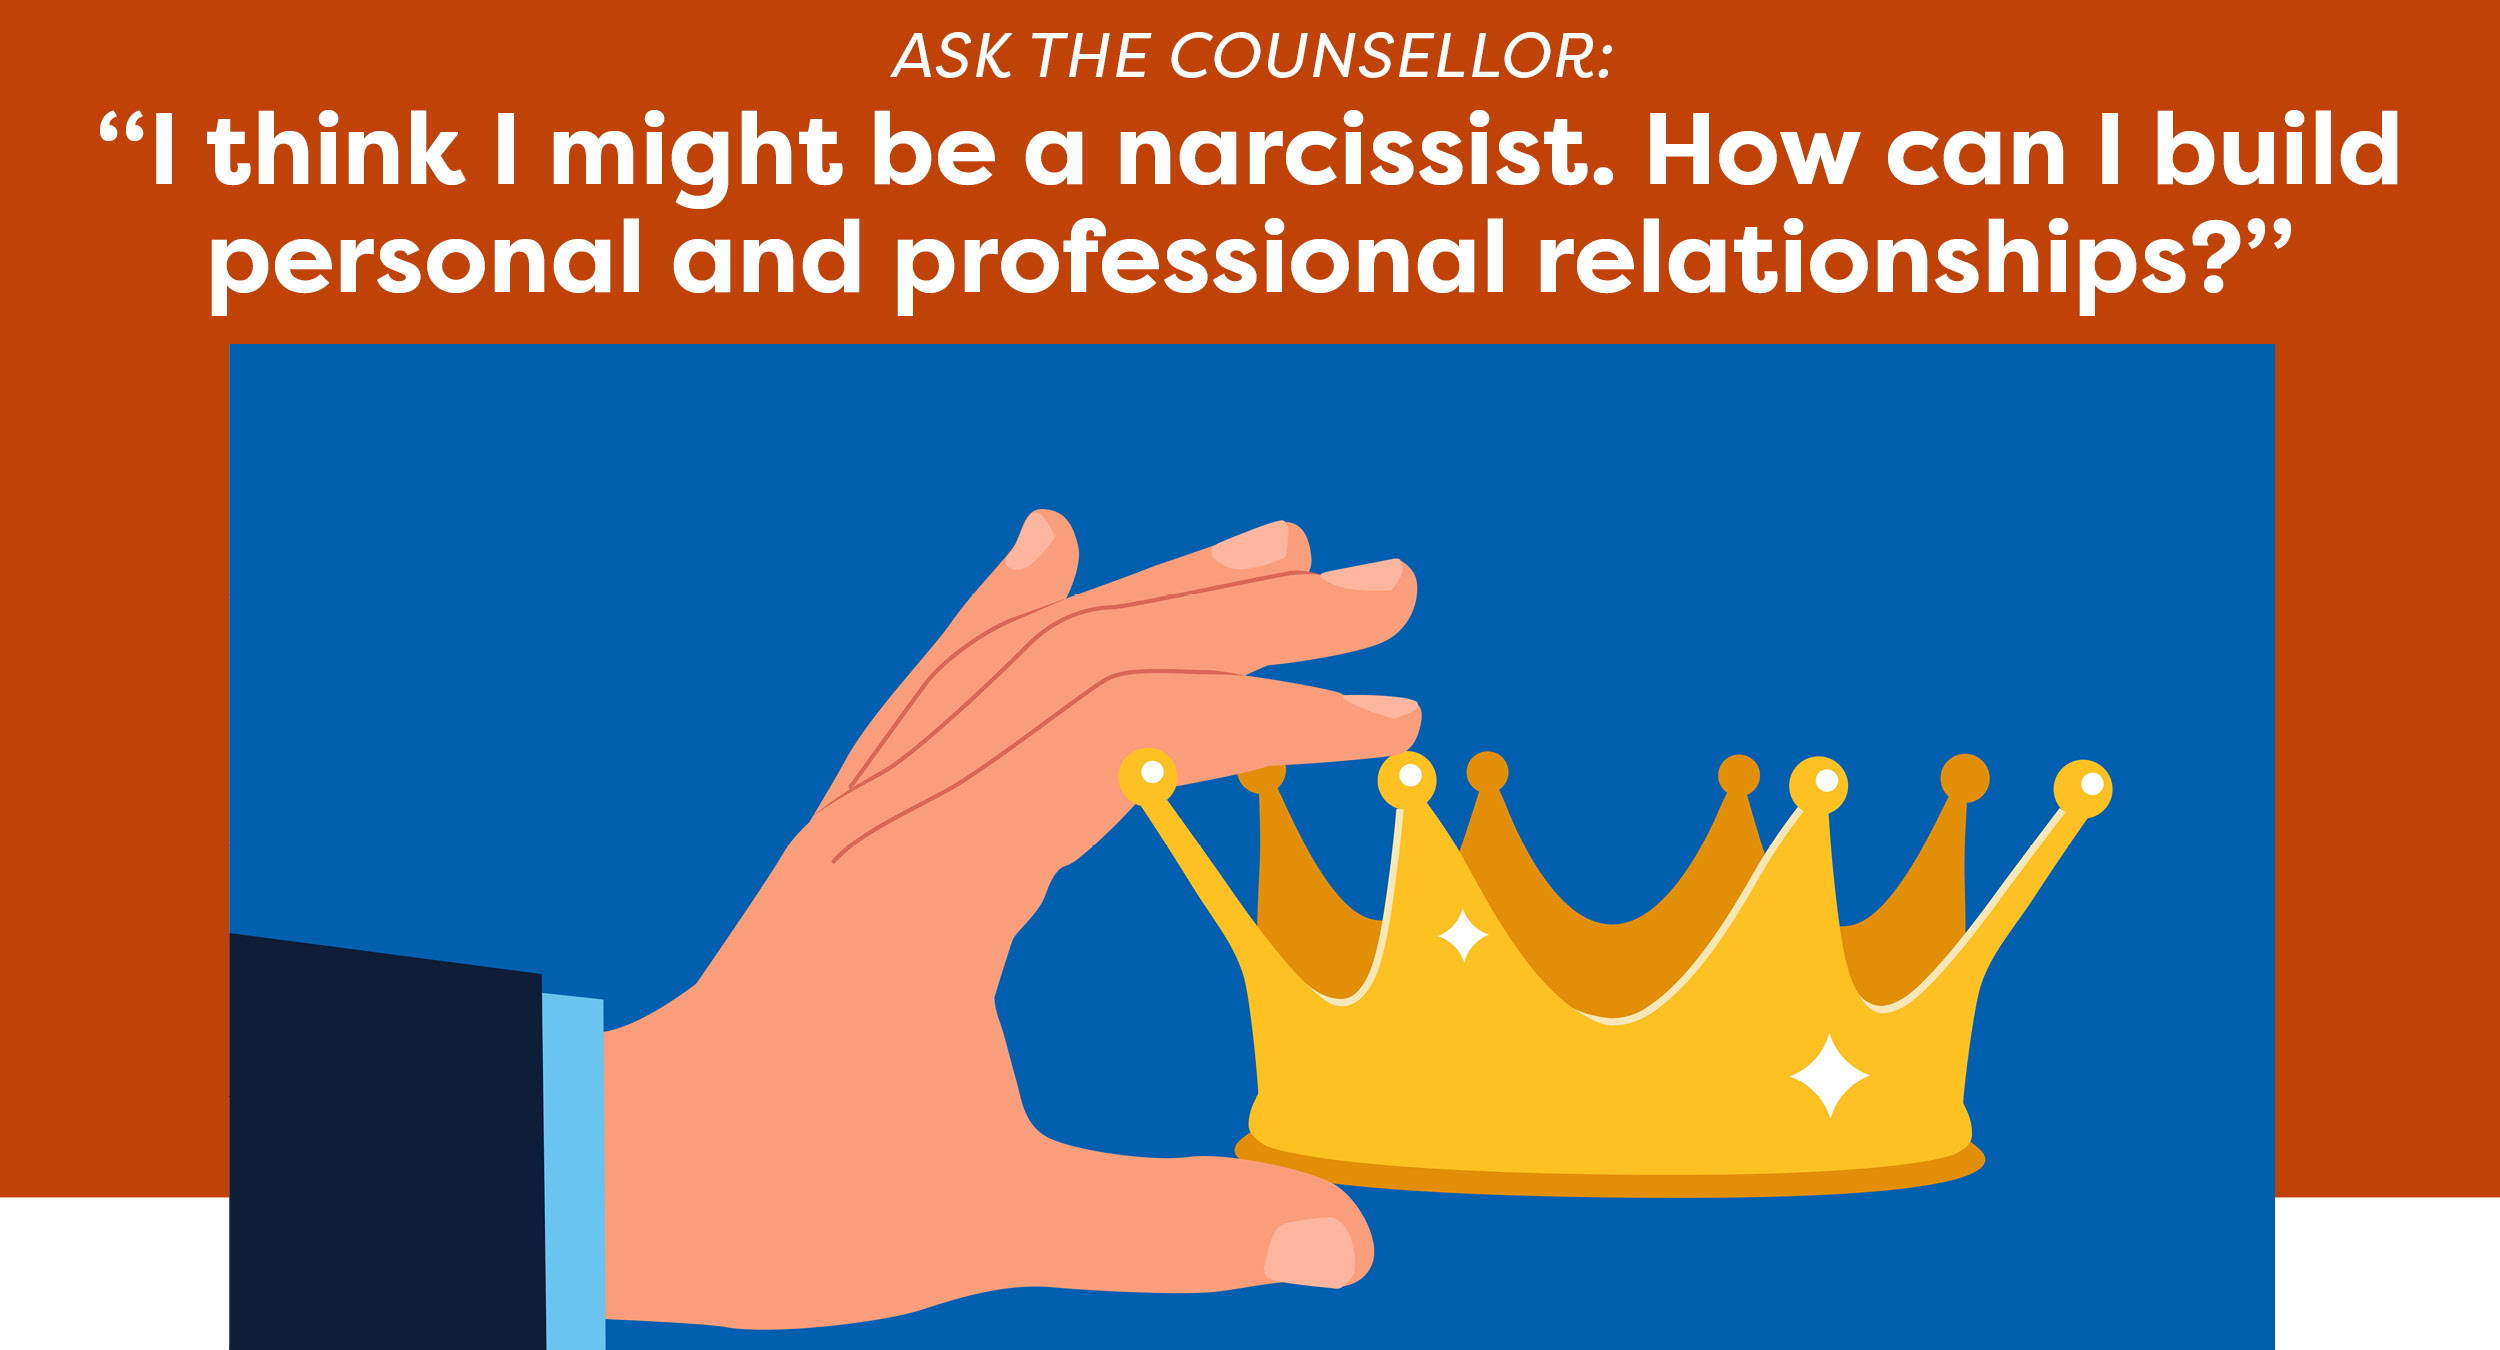 Ask the counsellor: “I think I might be a narcissist. How can I build personal and professional relationships?”